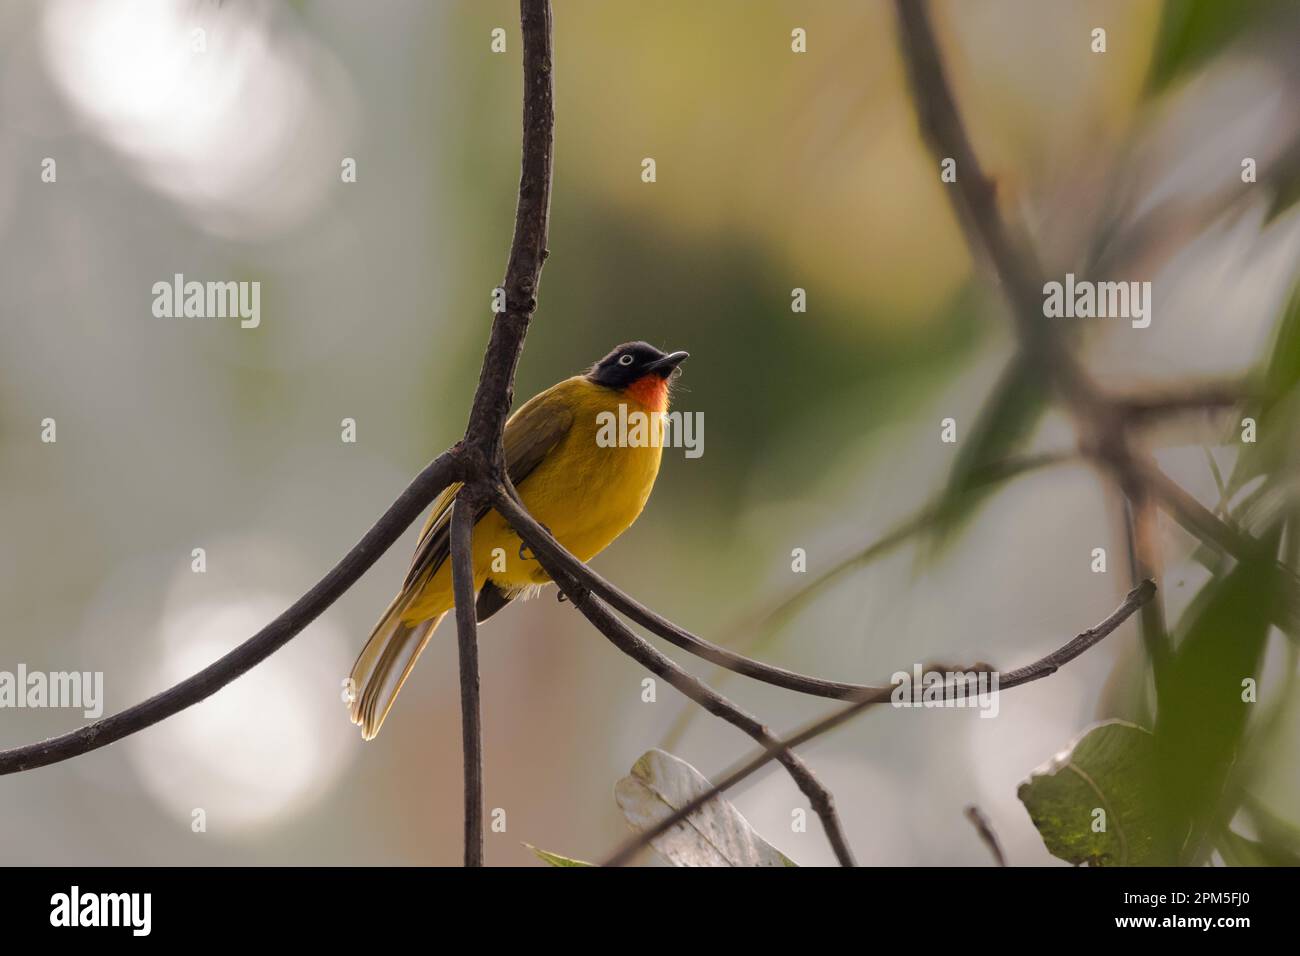 A black headed bulbul bird in branches of a tree in search of insects Stock Photo